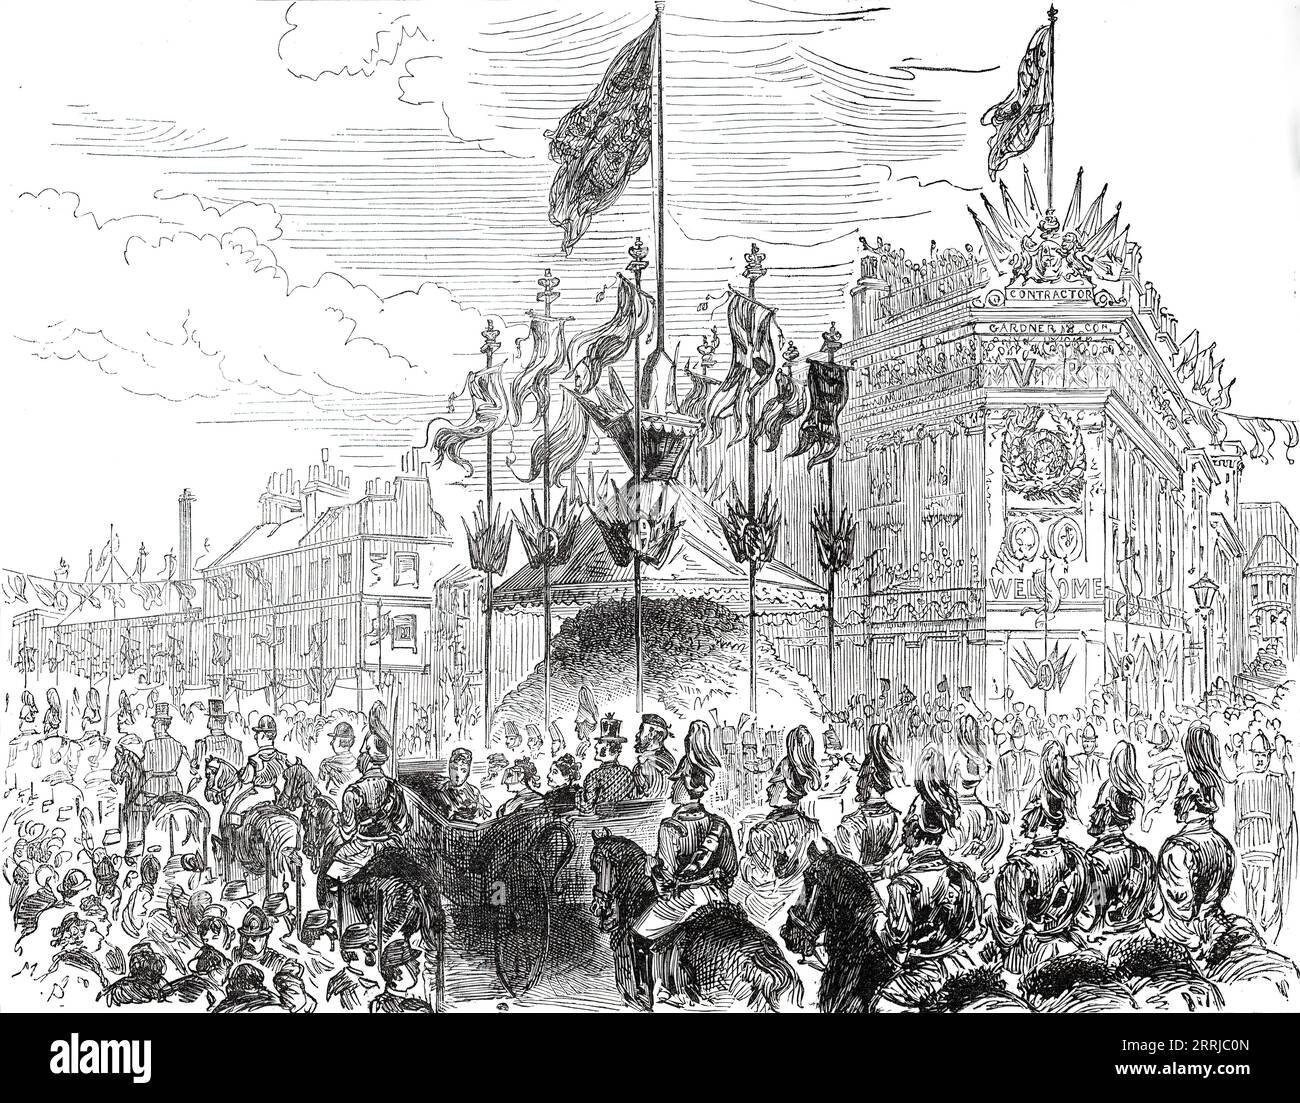 The Queen's Visit to the East End of London: Trophy in Whitechapel-Road, 1876. 'Her Majesty went...to open the new wing of the London Hospital buildings in Whitechapel-road. It was a high festival for the East End of London...The obelisk at the junction of the Whitechapel and Commercial roads was entirely surrounded by a large pavilion containing a mass of shrubs and evergreens, and in the centre was a trophy surmounted by flags and other decorations with a high mast, from which the Royal standard was run up on her Majesty's approach...The word &quot;Welcome&quot; occurred repeatedly, sometime Stock Photo